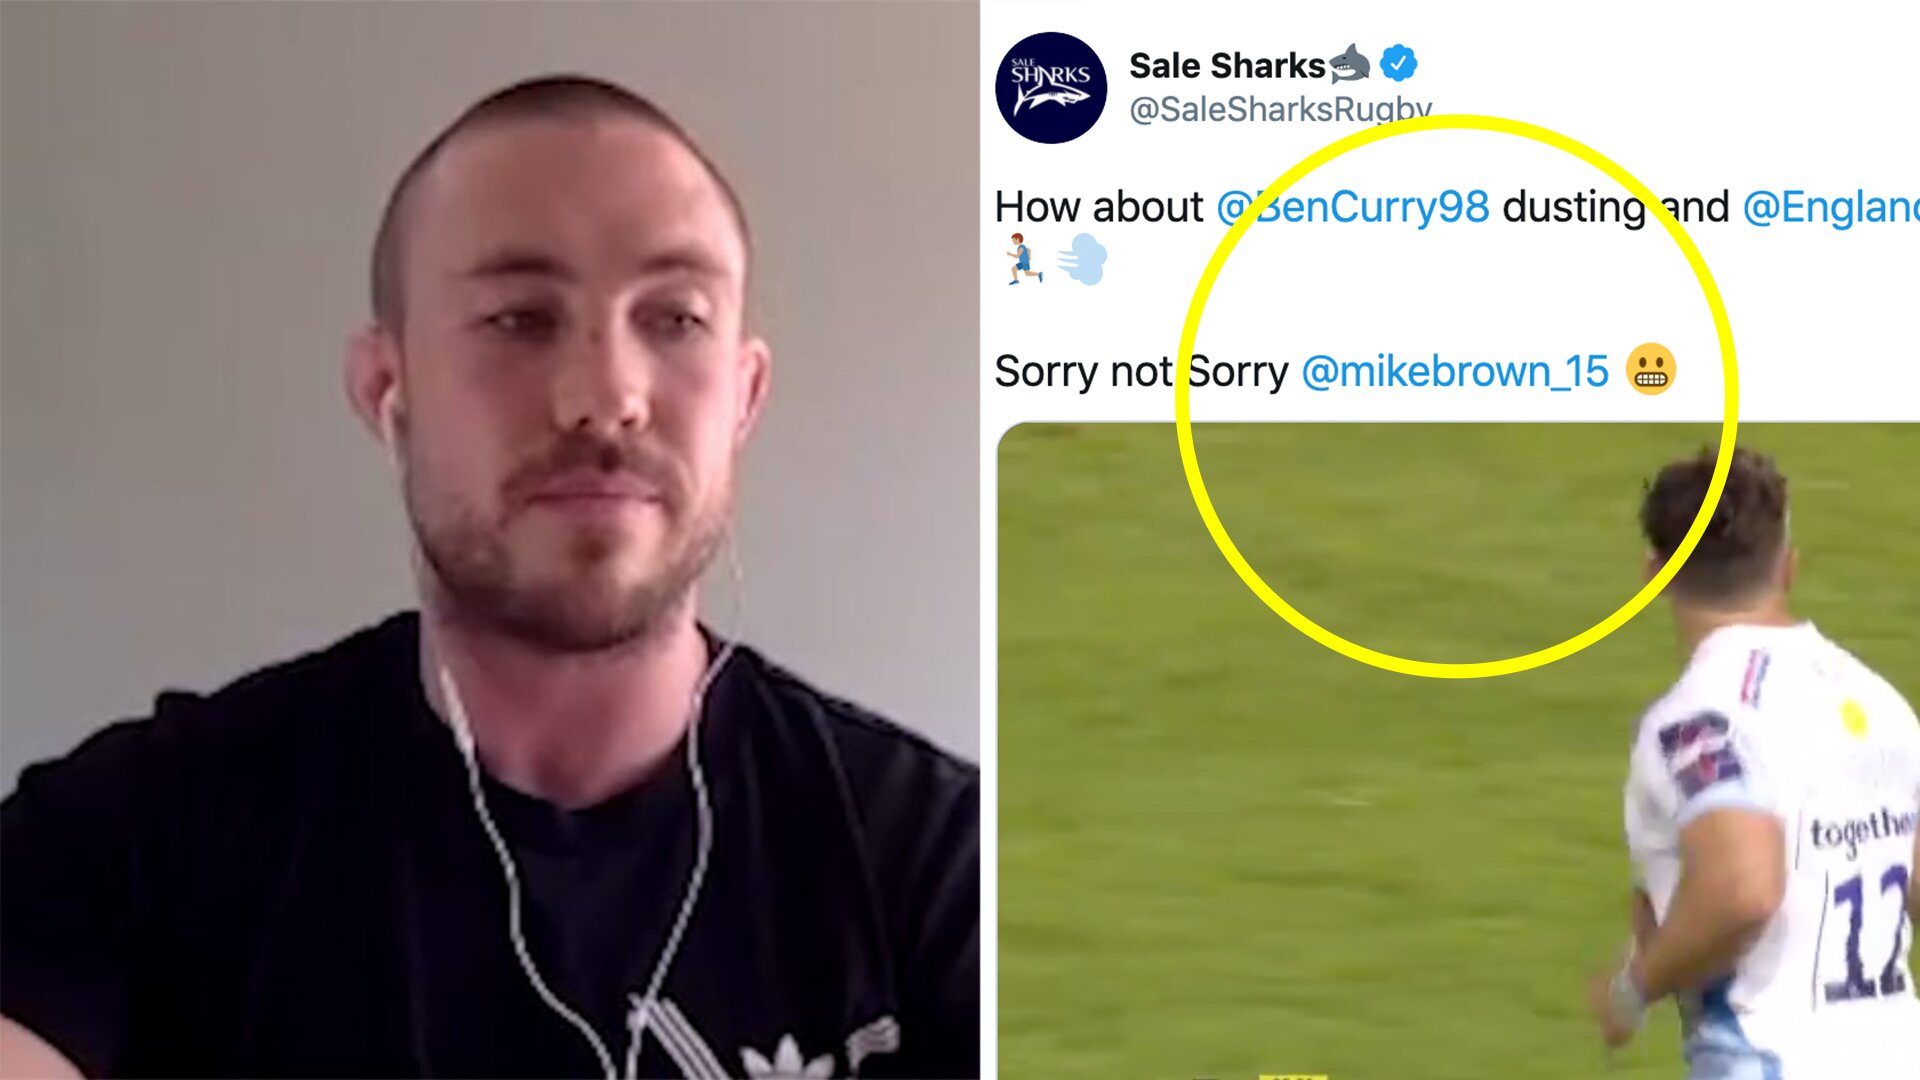 Mike Brown are calling out the Sale Sharks social media team for being too savage